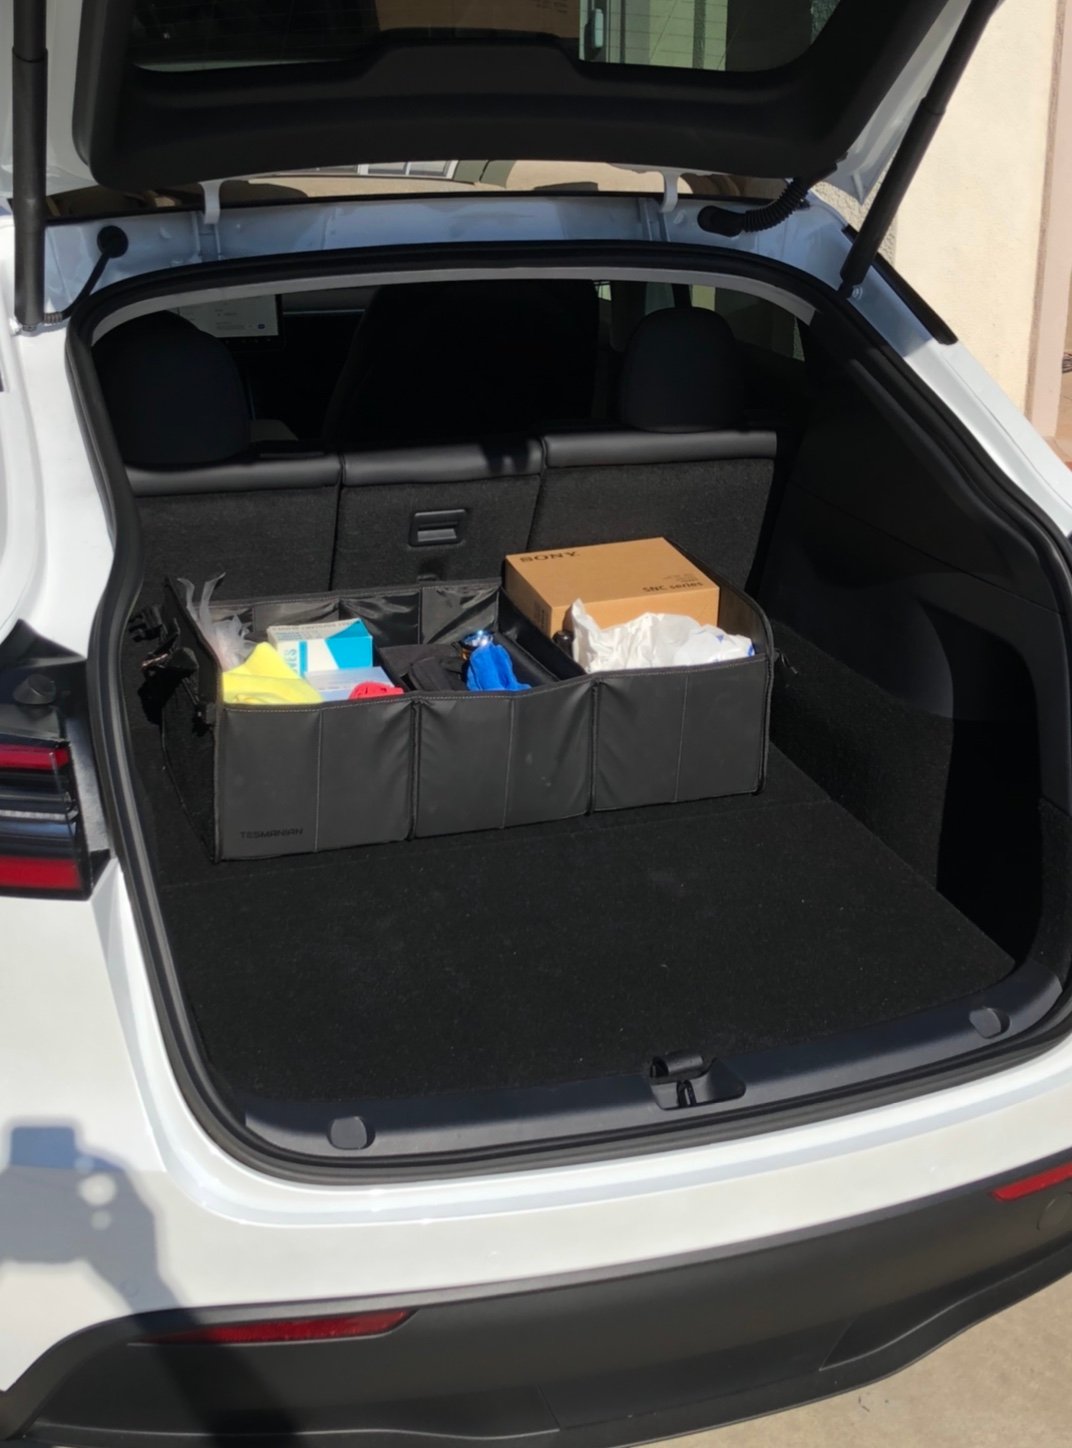 Did you get any storage box for Model Y?